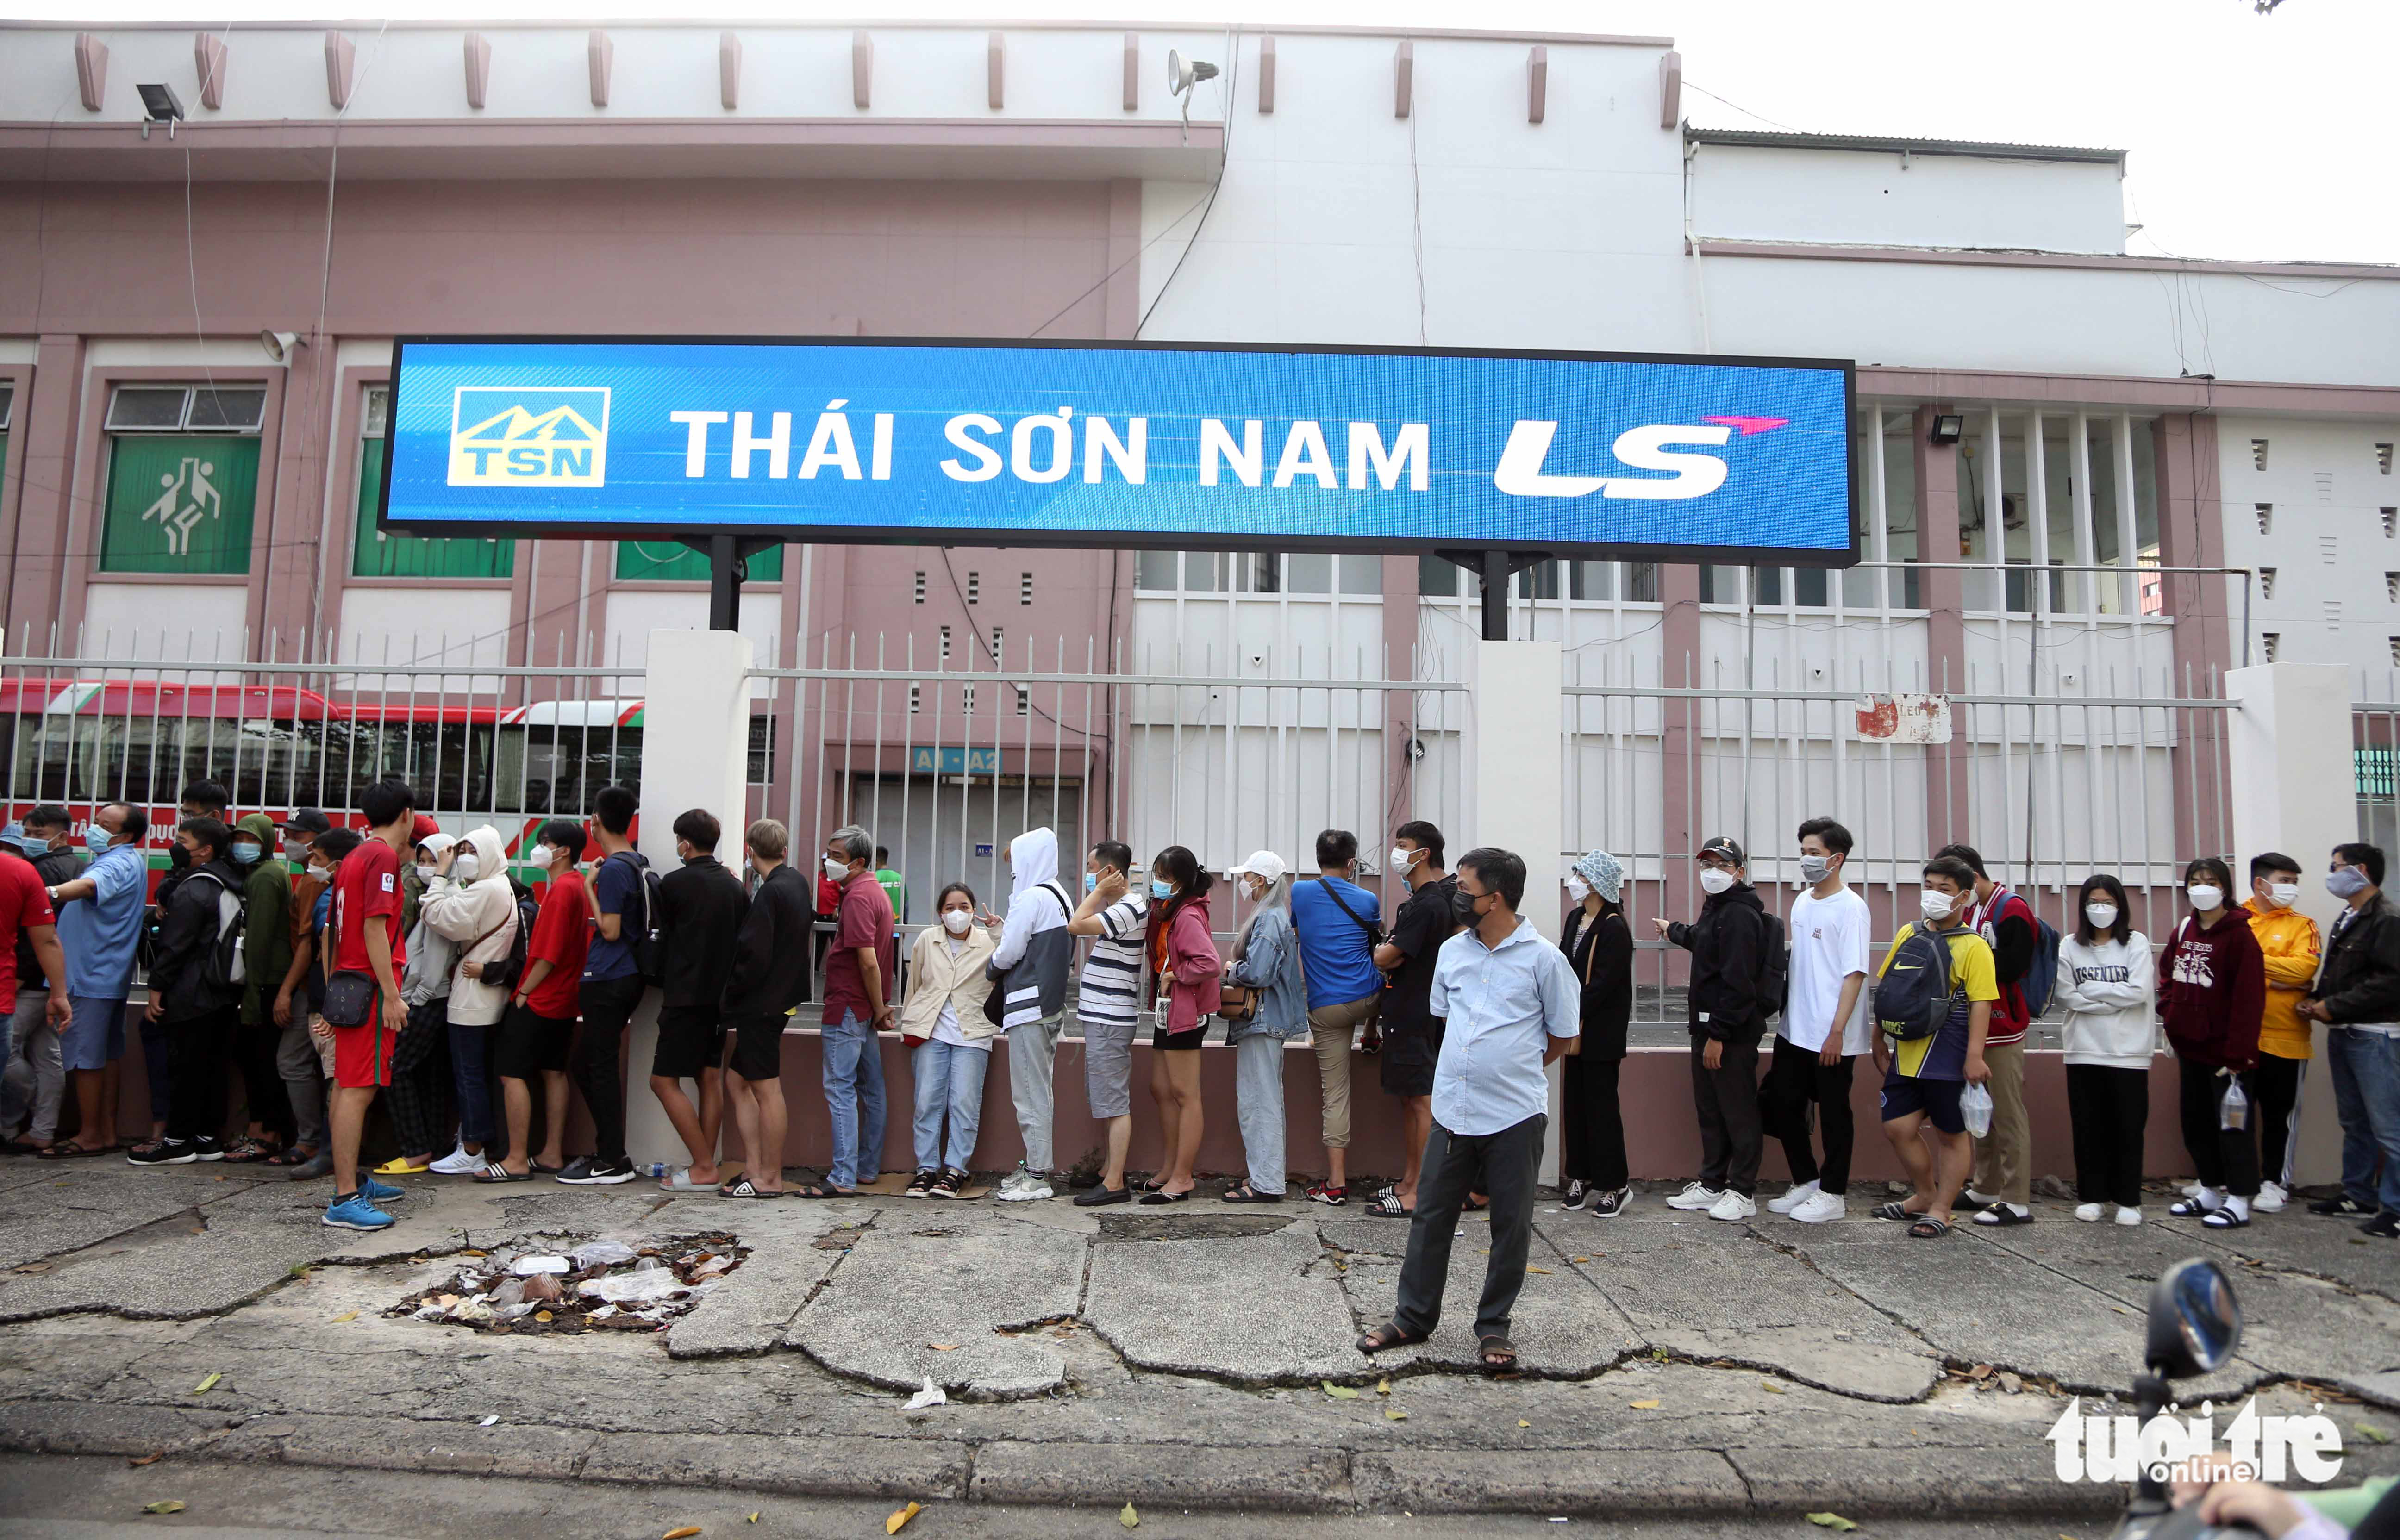 Long queues at Ho Chi Minh City stadium ahead of Vietnam’s friendly with Afghanistan